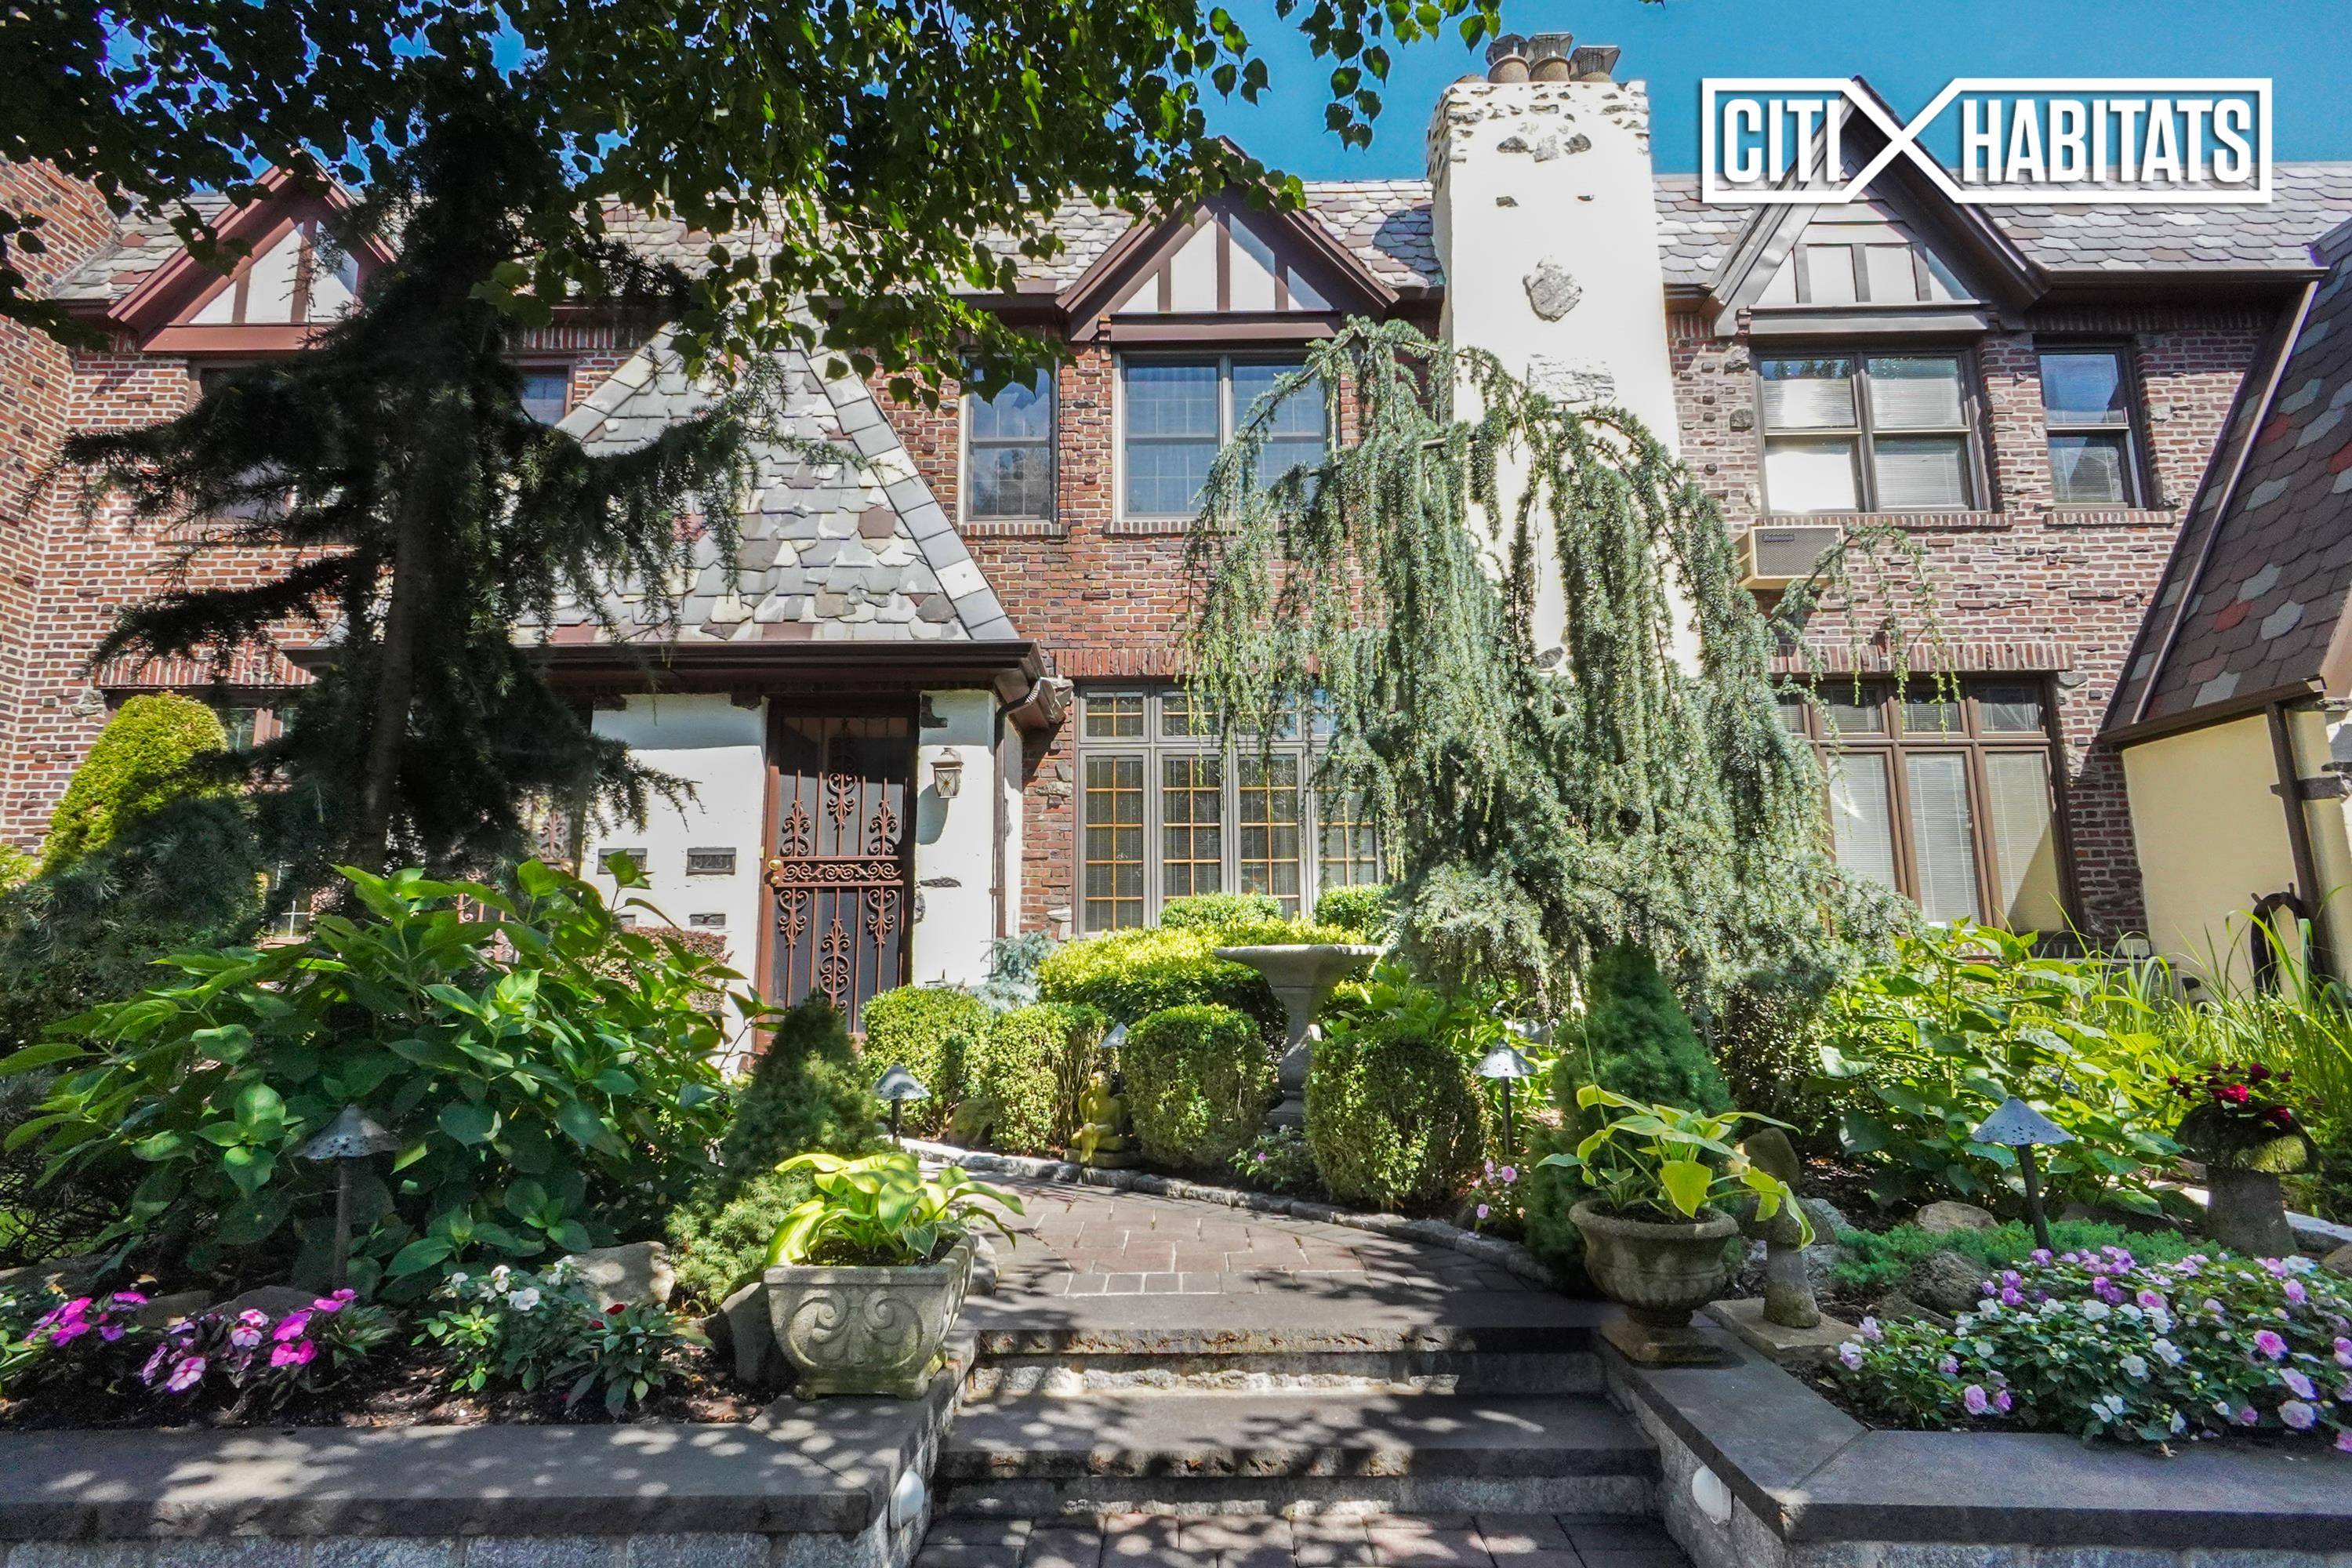 This impeccable, spacious home in Middle Village is truly one of a kind with two wood burning fireplaces, three large bedrooms and hardwood floors throughout.